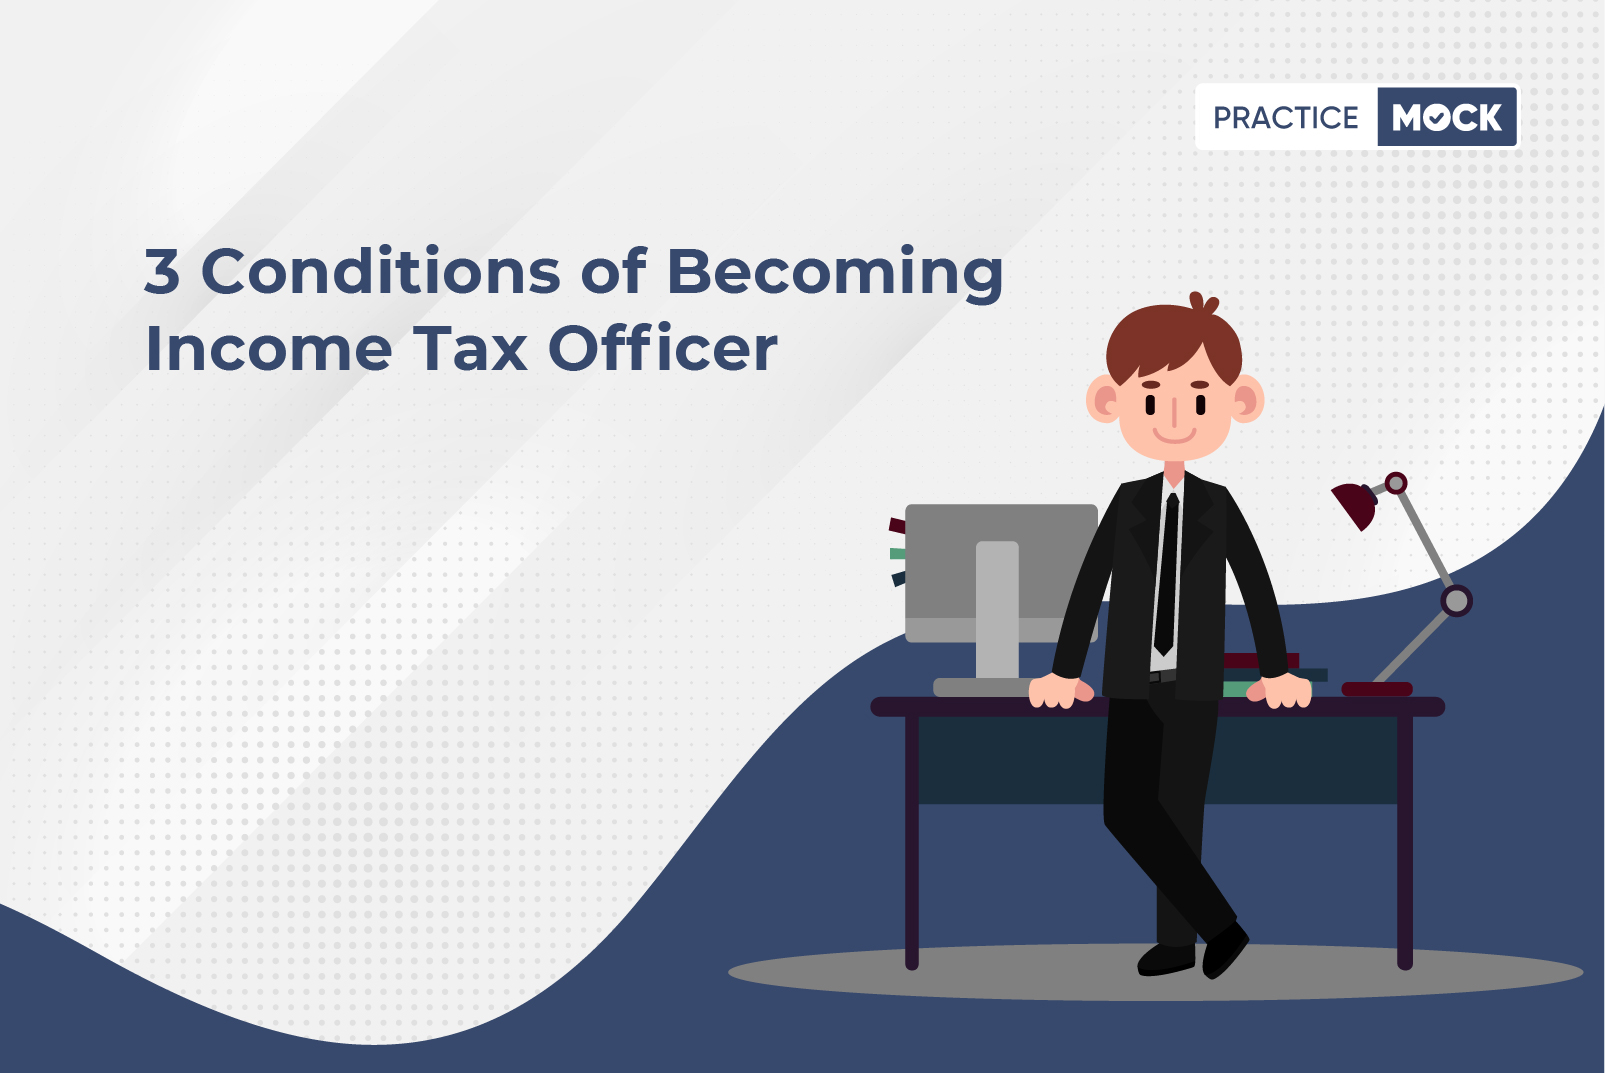 3 Conditions of becoming Income Tax Officer